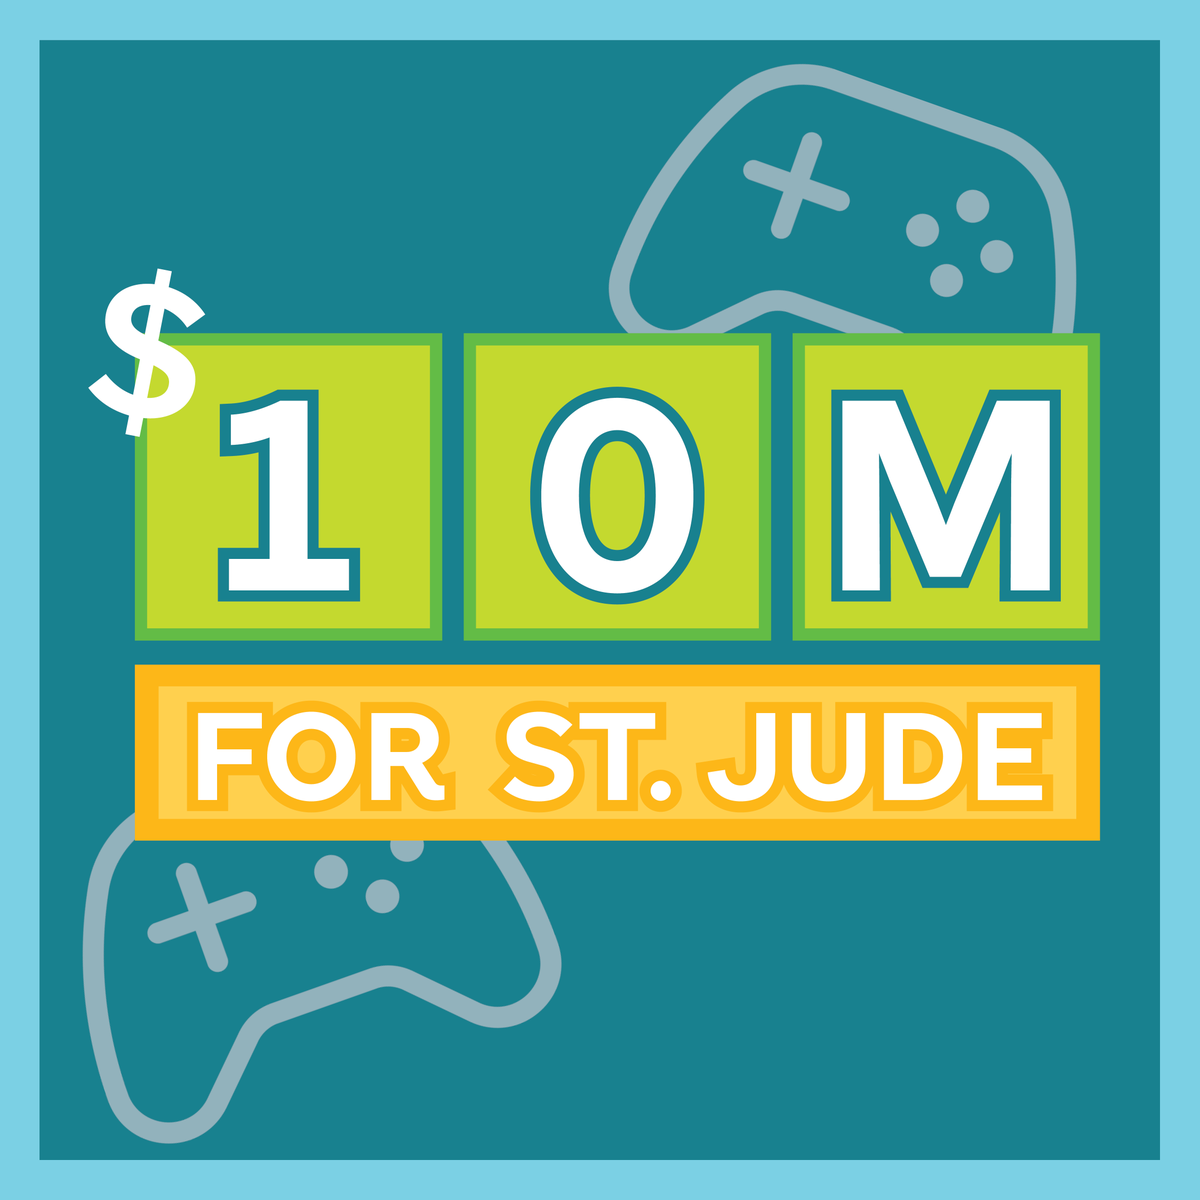 We are overwhelmed by the support you showed during the Build Against Cancer stream the last 24 hours. Together, you helped @DrLupo and @MrsDrLupo reach their $10M milestone. Your support means St. Jude helps more kids around the globe. Thank you!

#BAC2021